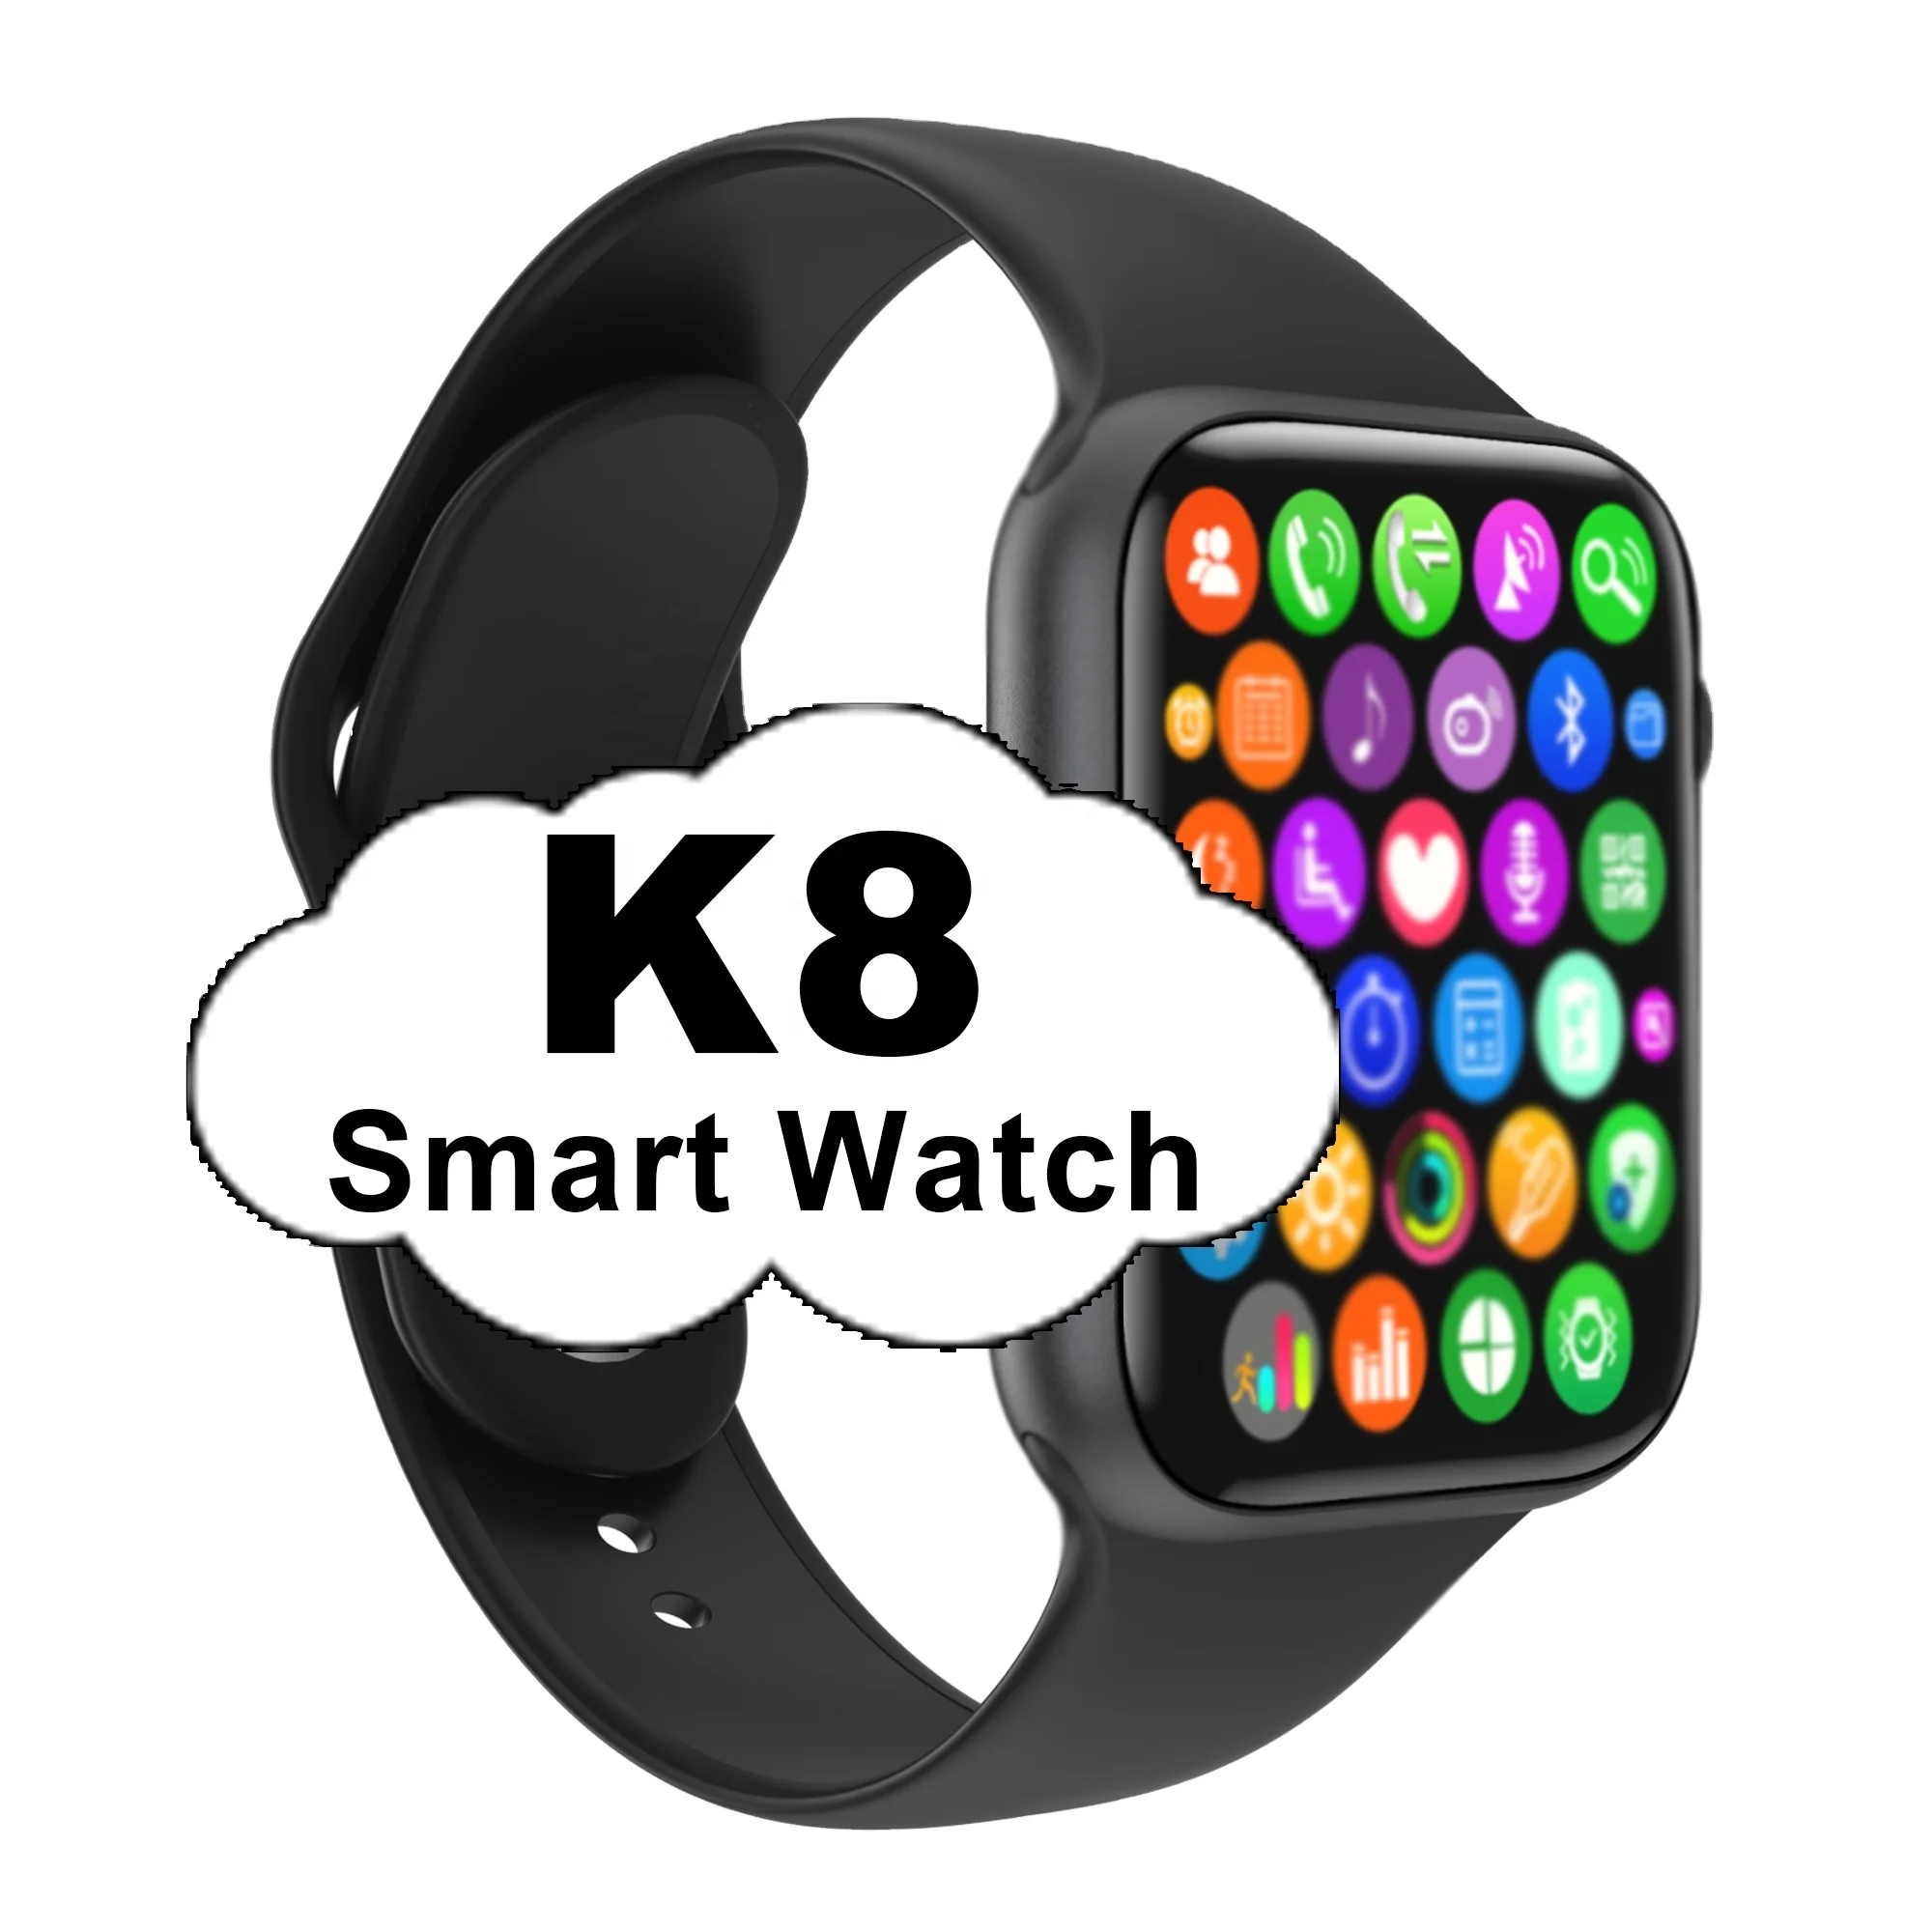 

K8 Smart Watch With 1.78Inch Full Touching Screen Ecg Temperature Detection For Two Luxury Wristbands For Apple K8 Smartwatch, Black white pink